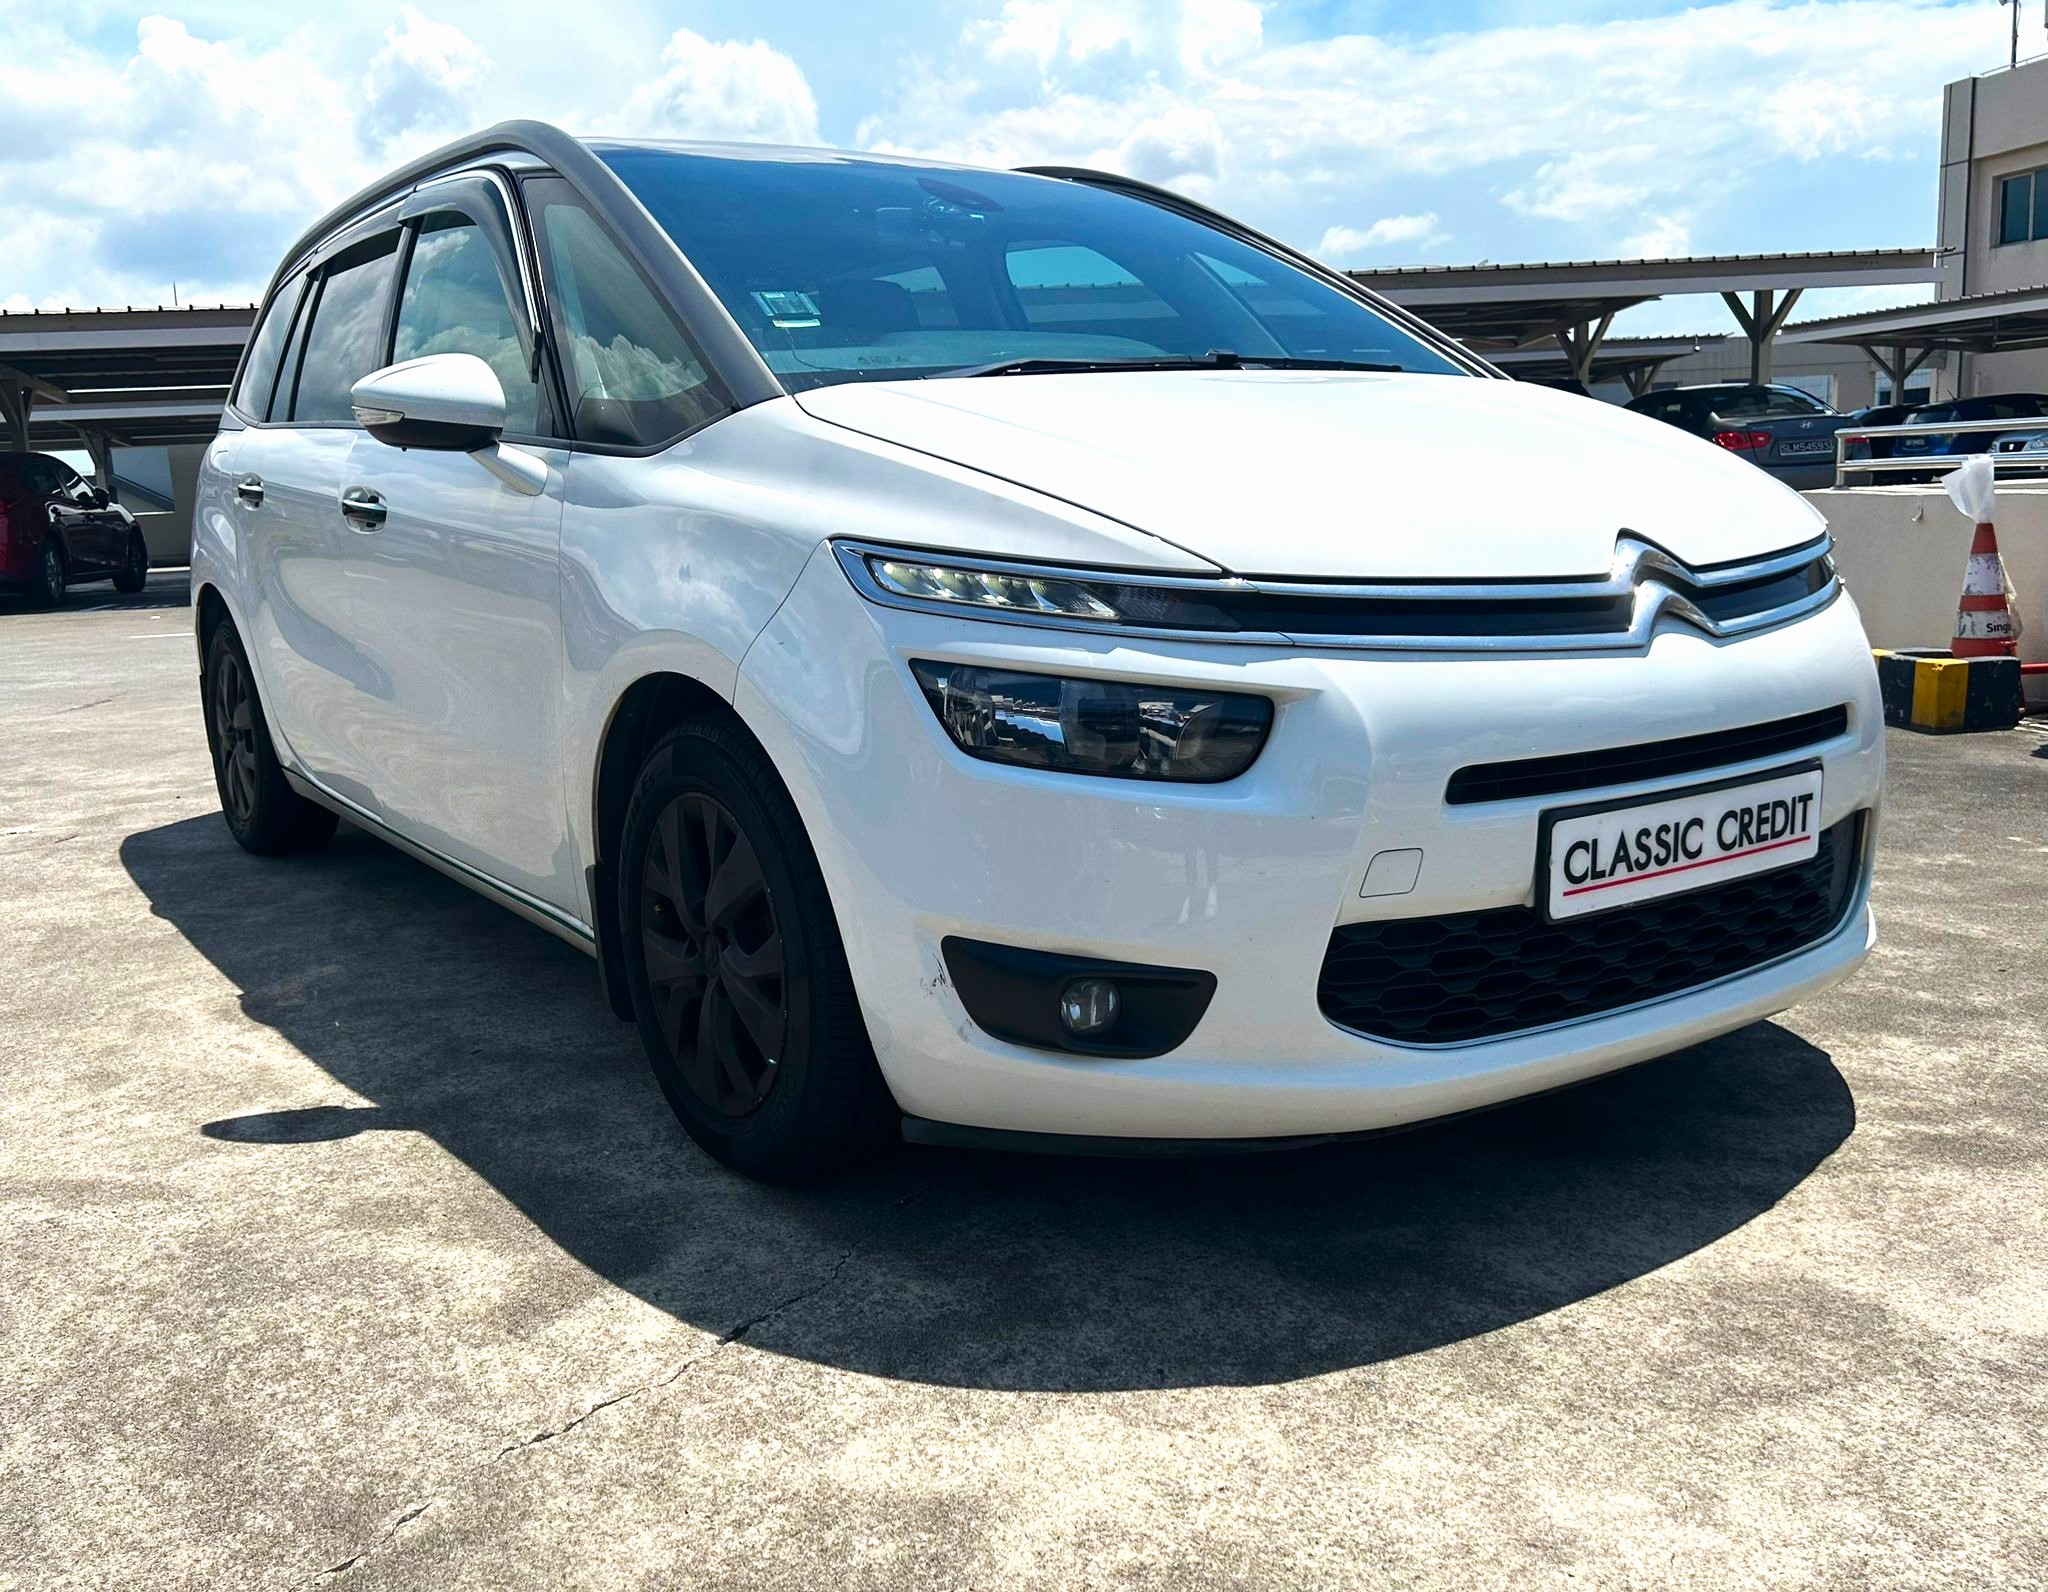 Buy Used Car Singapore | Citroen Grand C4 Picasso Diesel 1.6A BlueHDi Panoramic Roof